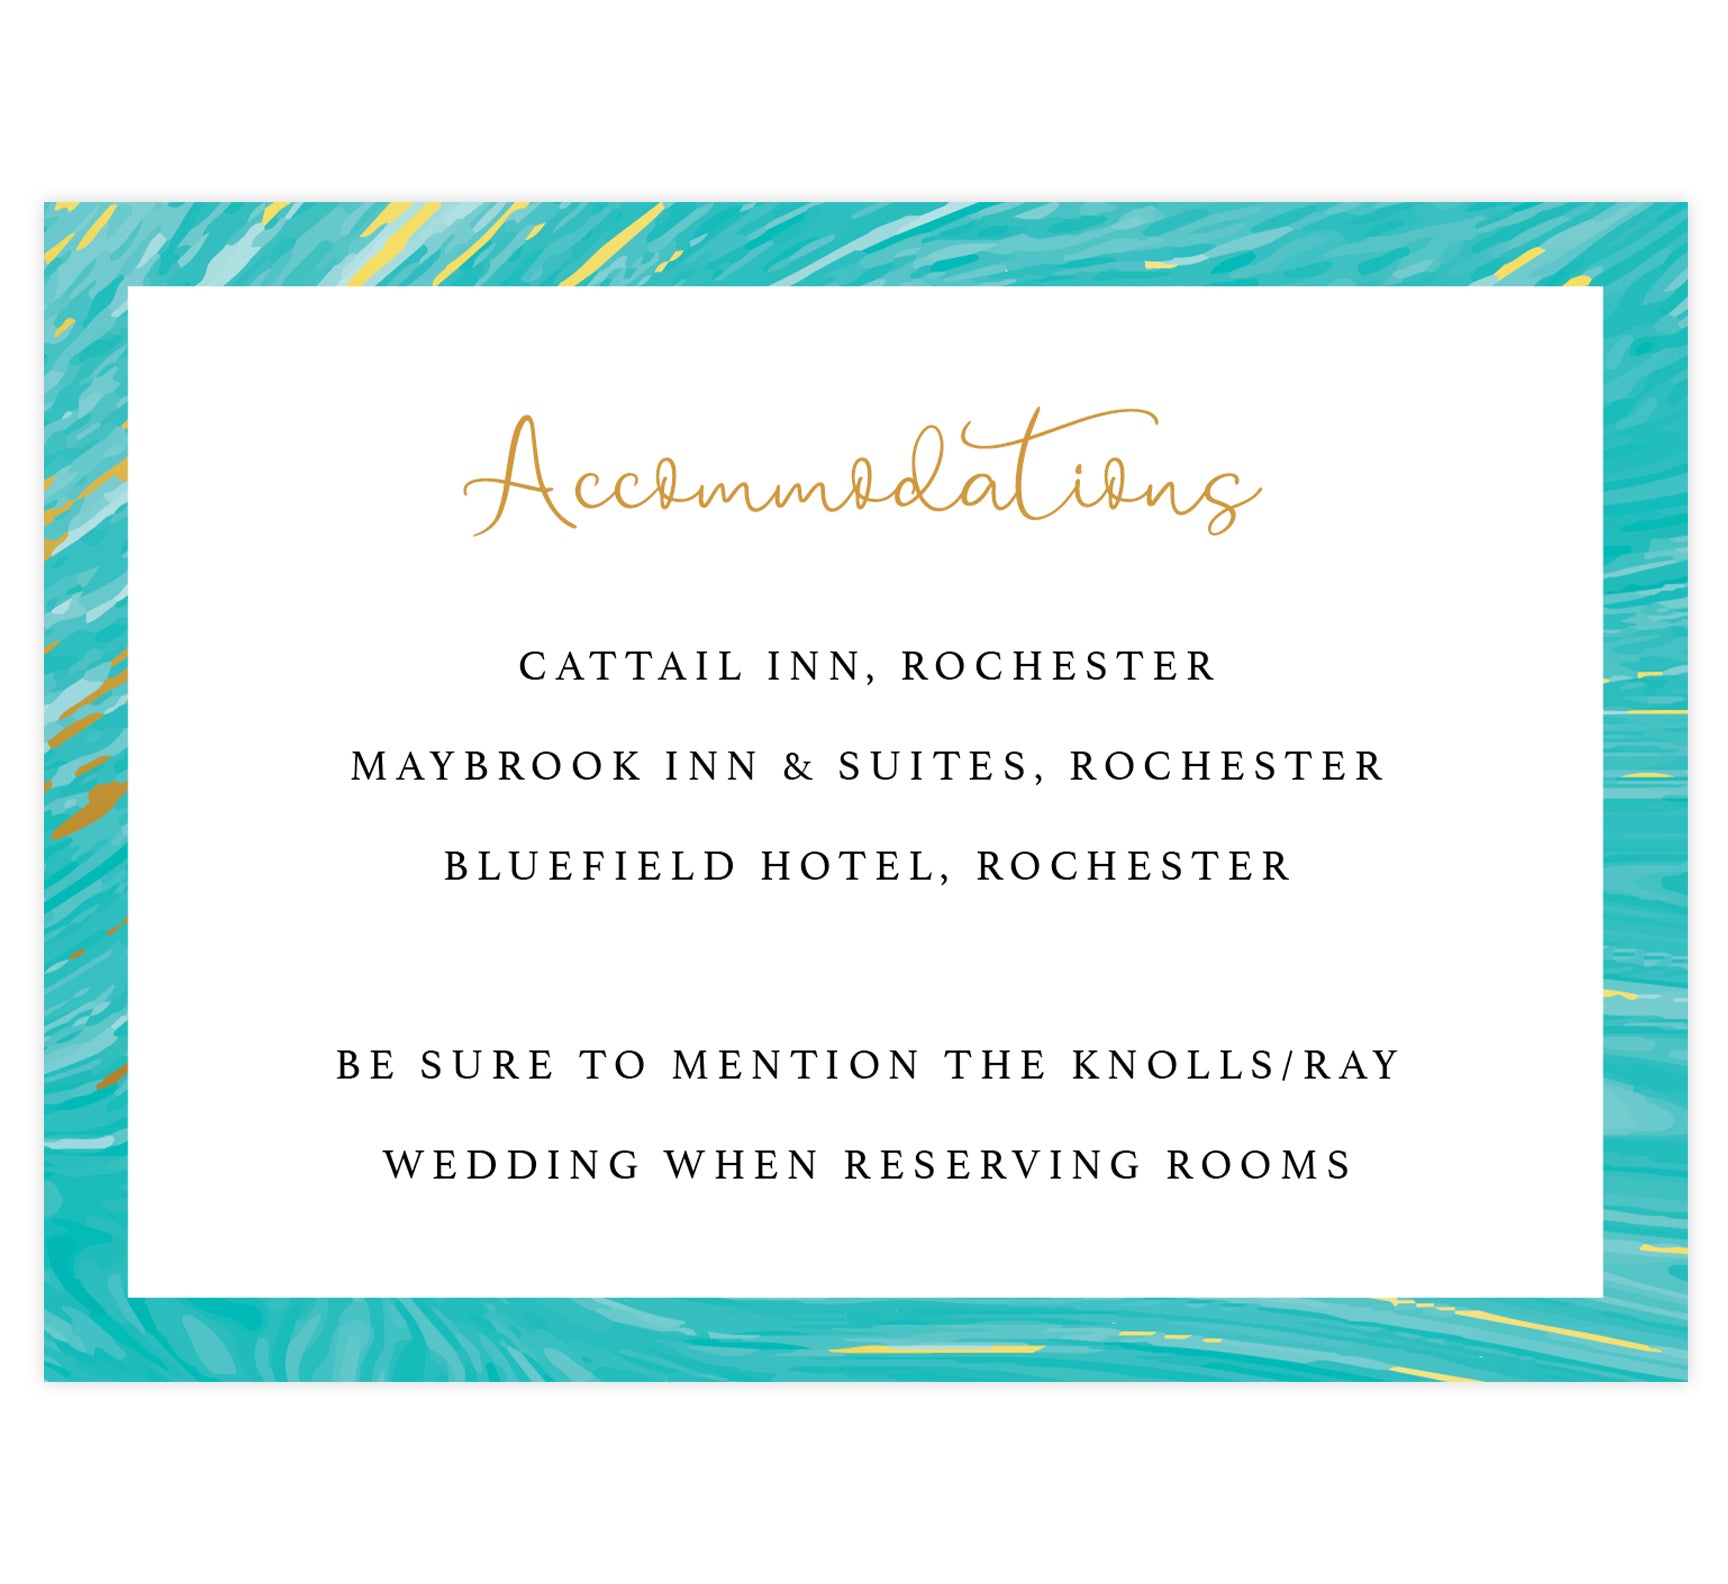 Teal and gold marble wedding accommodations/details card; white background with marble teal and gold frame on the outside edges, black and gold text